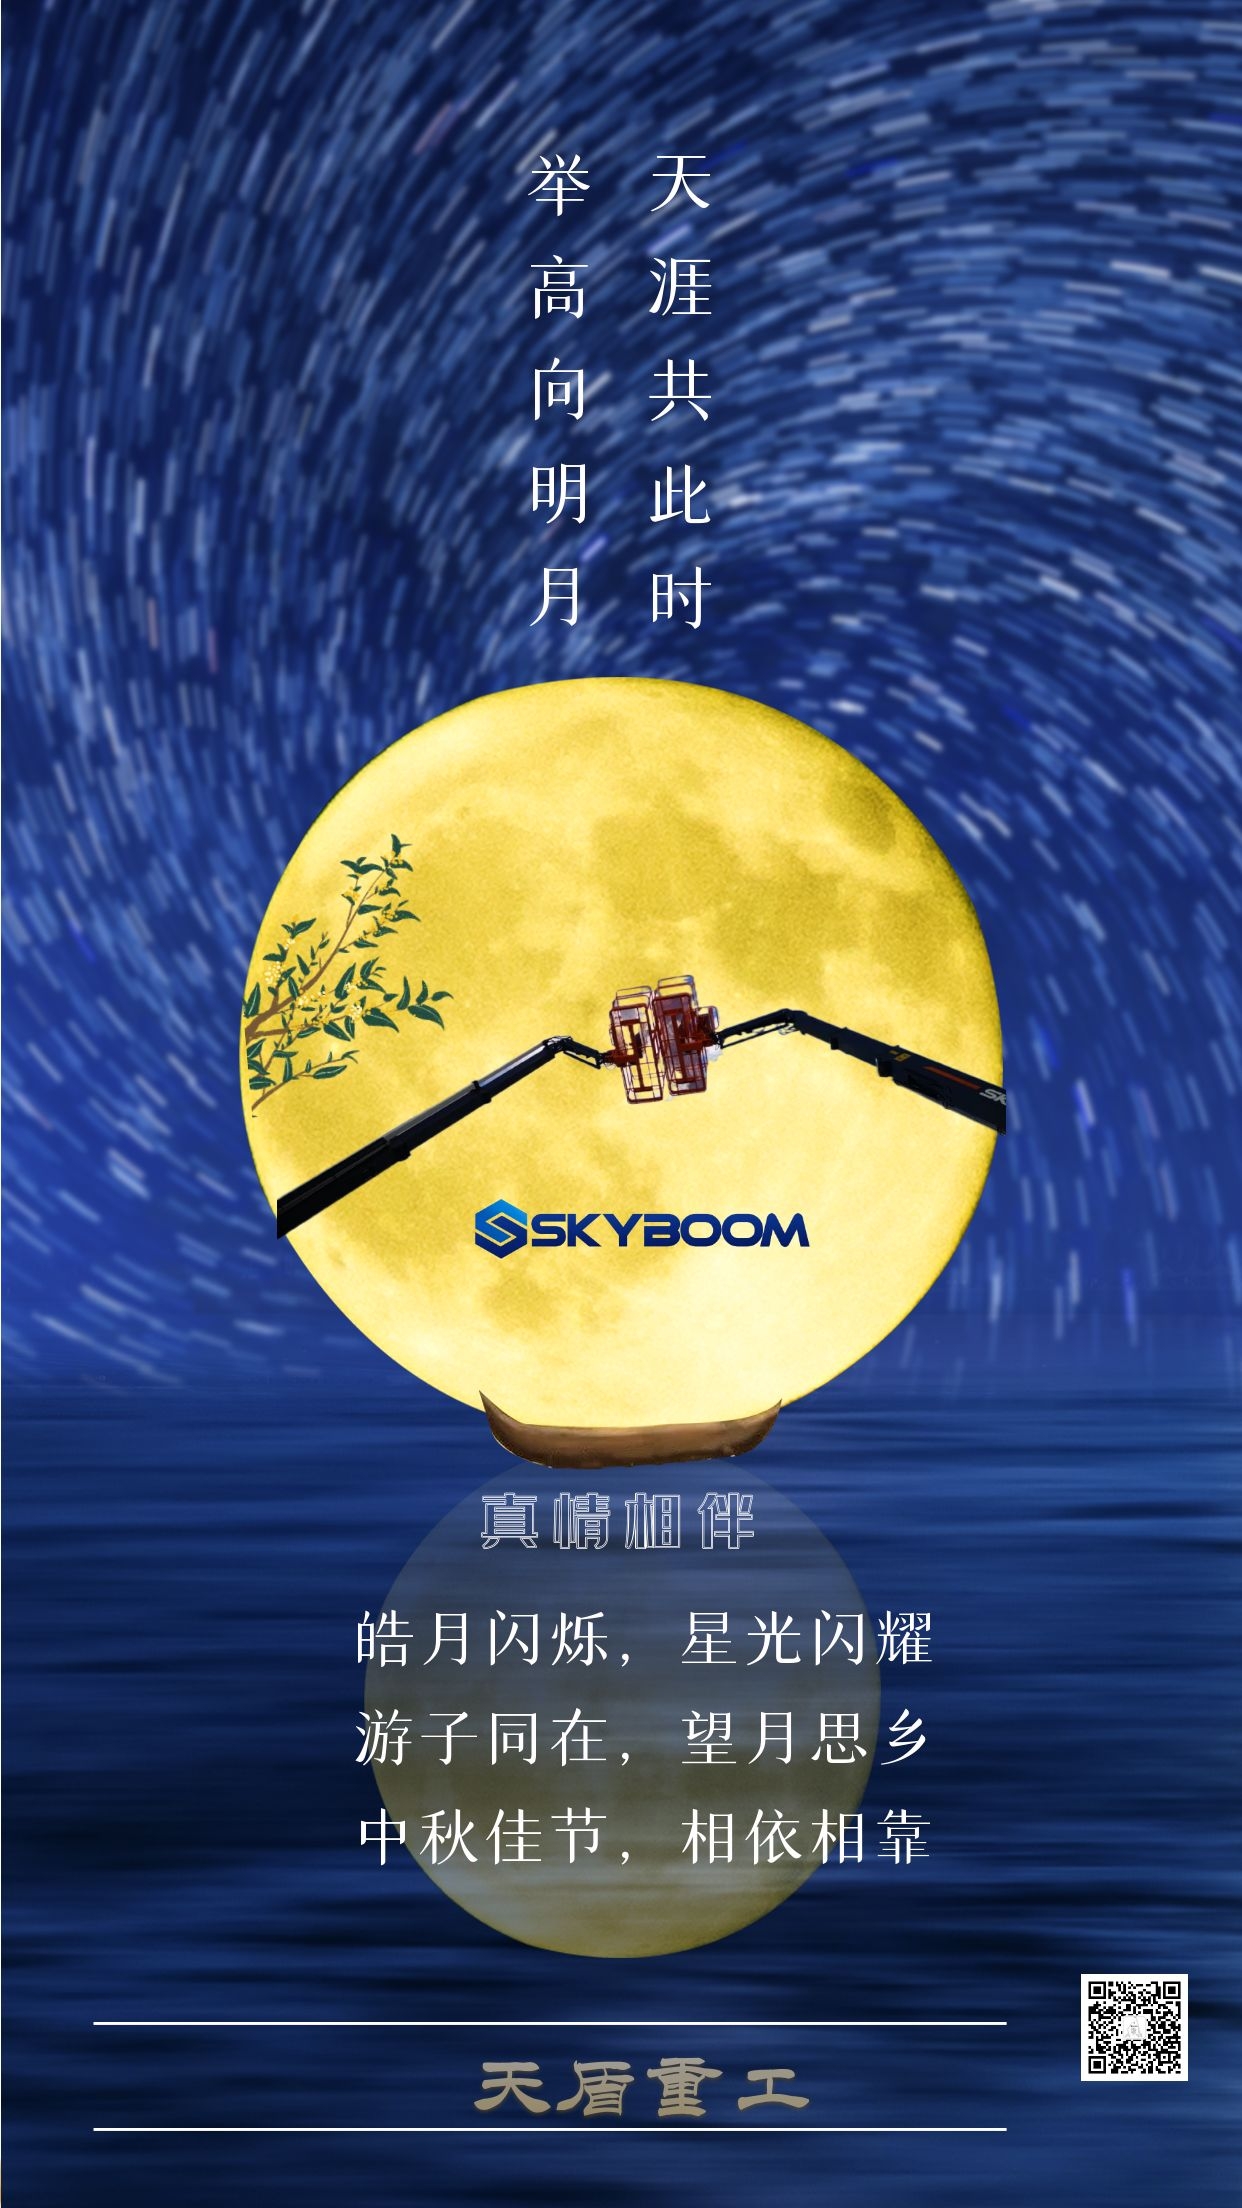 Happy Chinese Mid-Autumn Festival